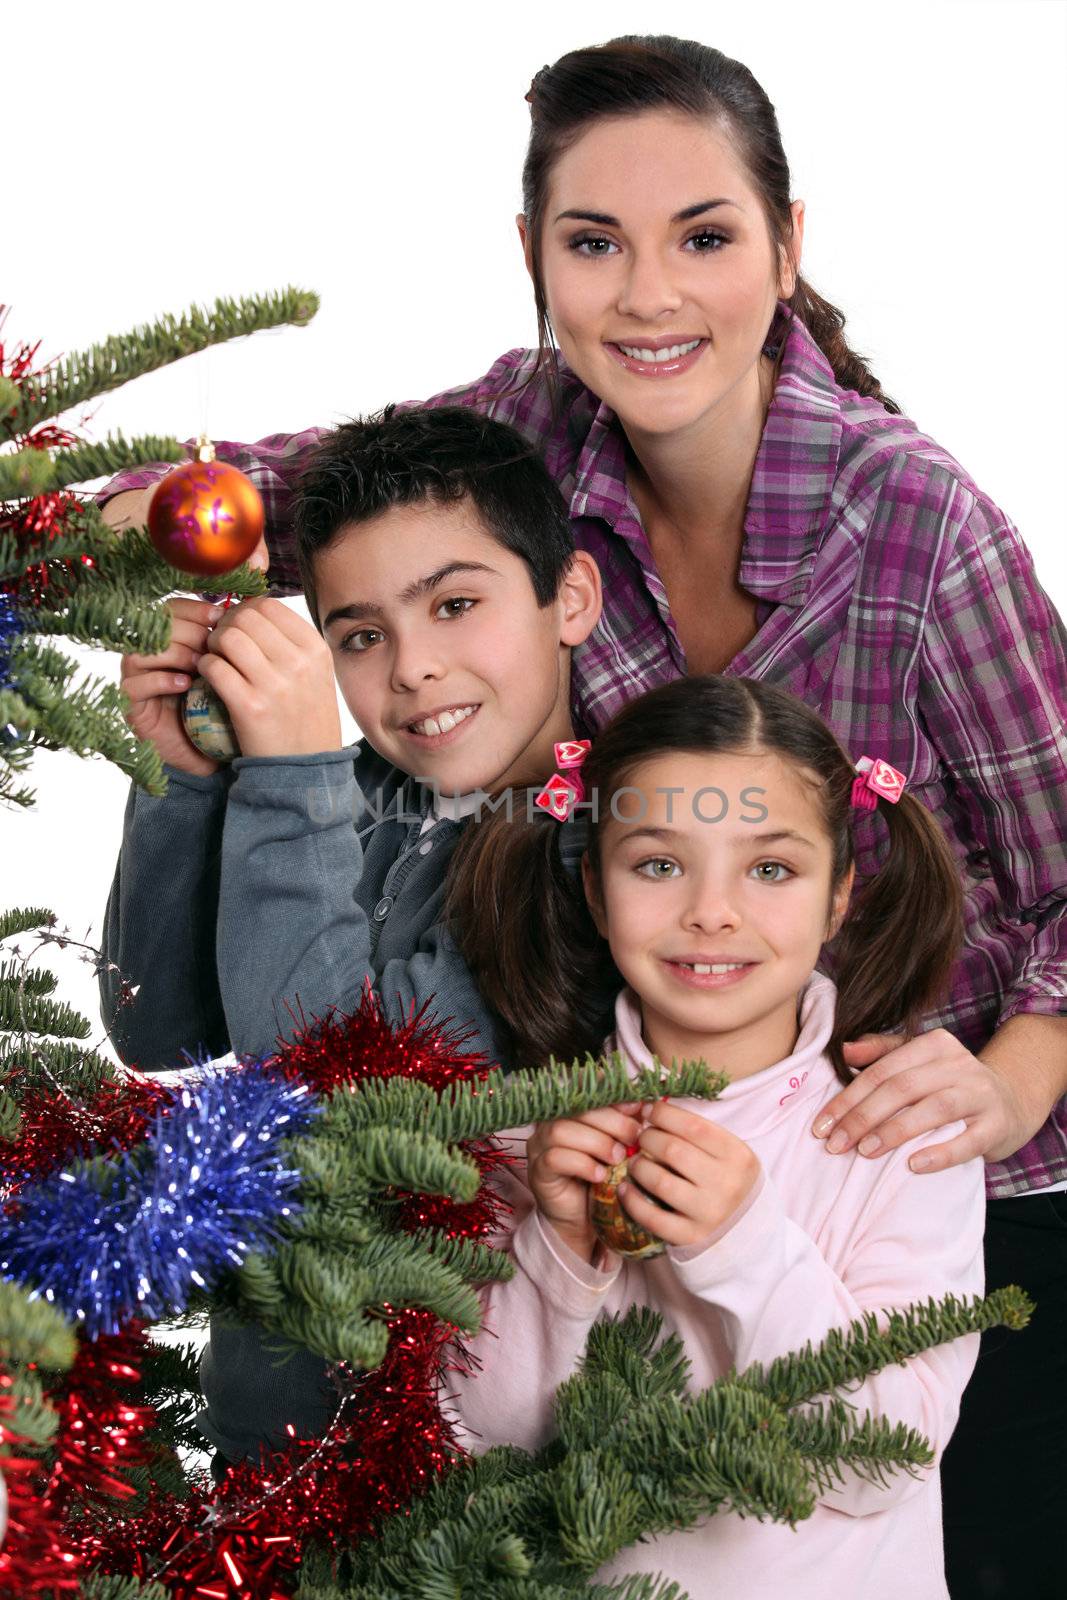 Family celebrating Christmas together by phovoir